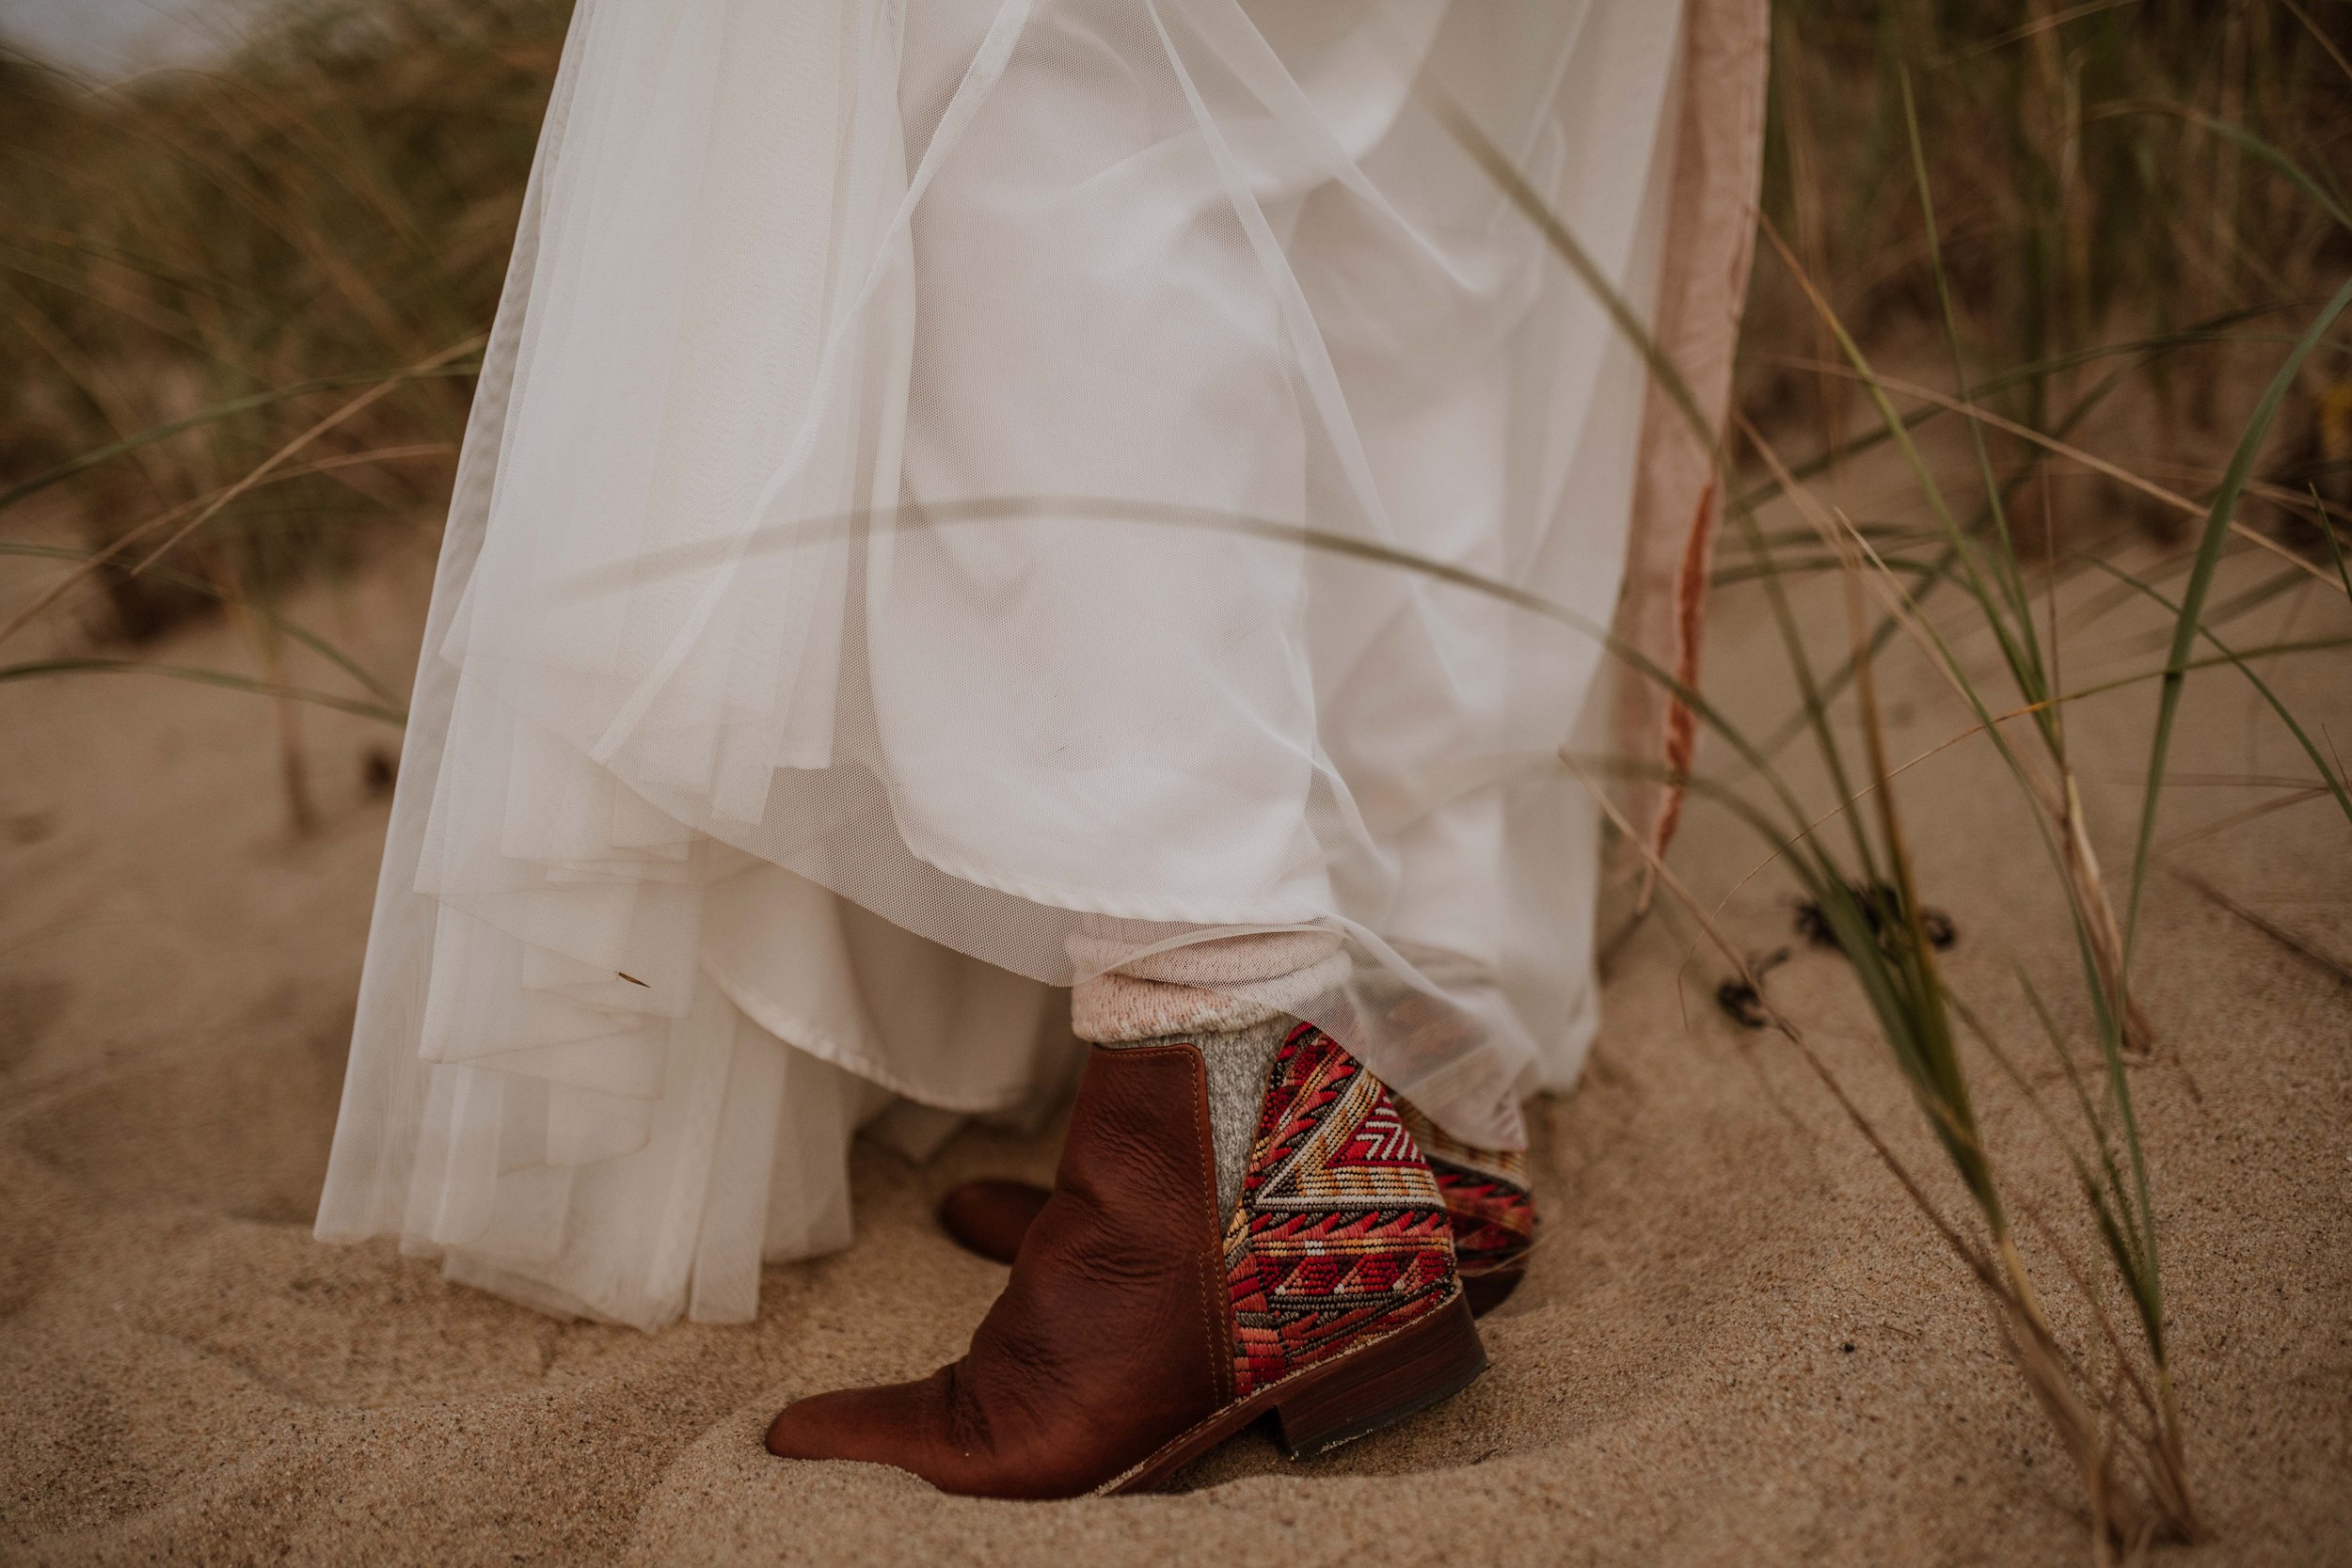 Bride's boots in the sand.